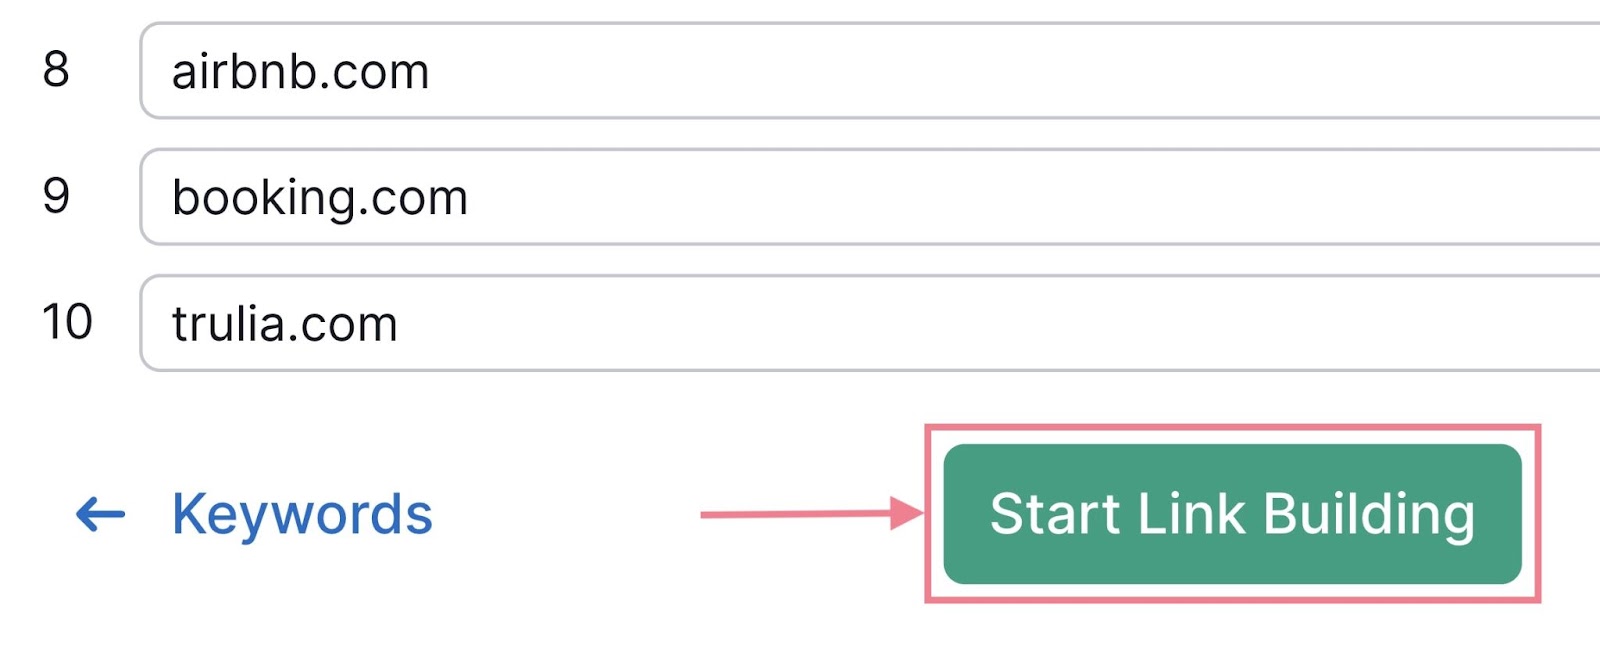 start link building button highlighted